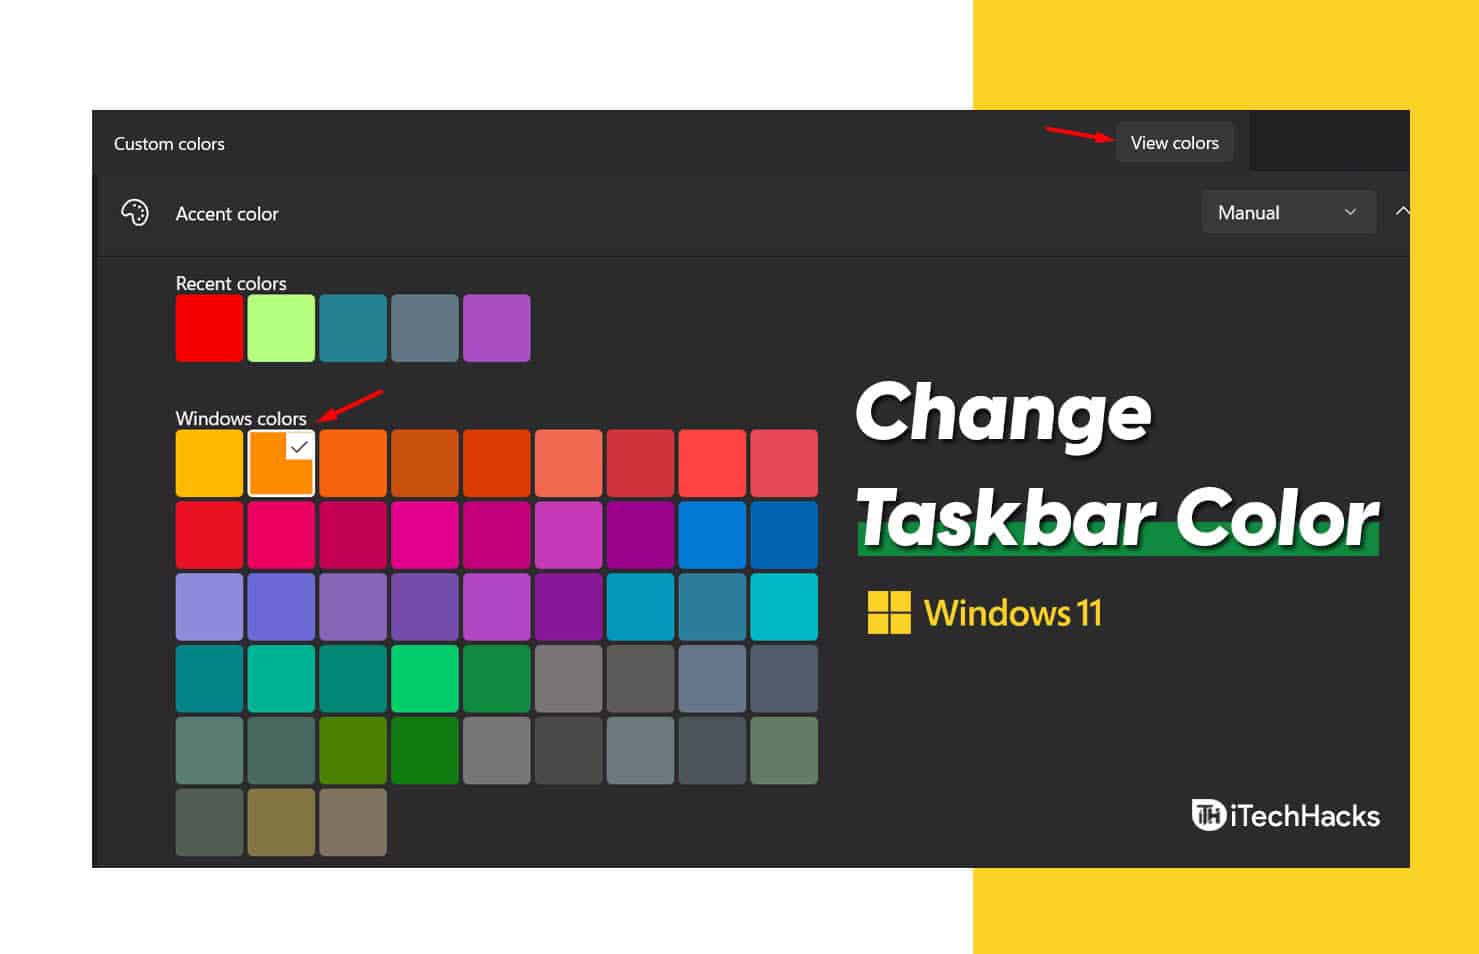 How to Change the Taskbar Color on Windows 11